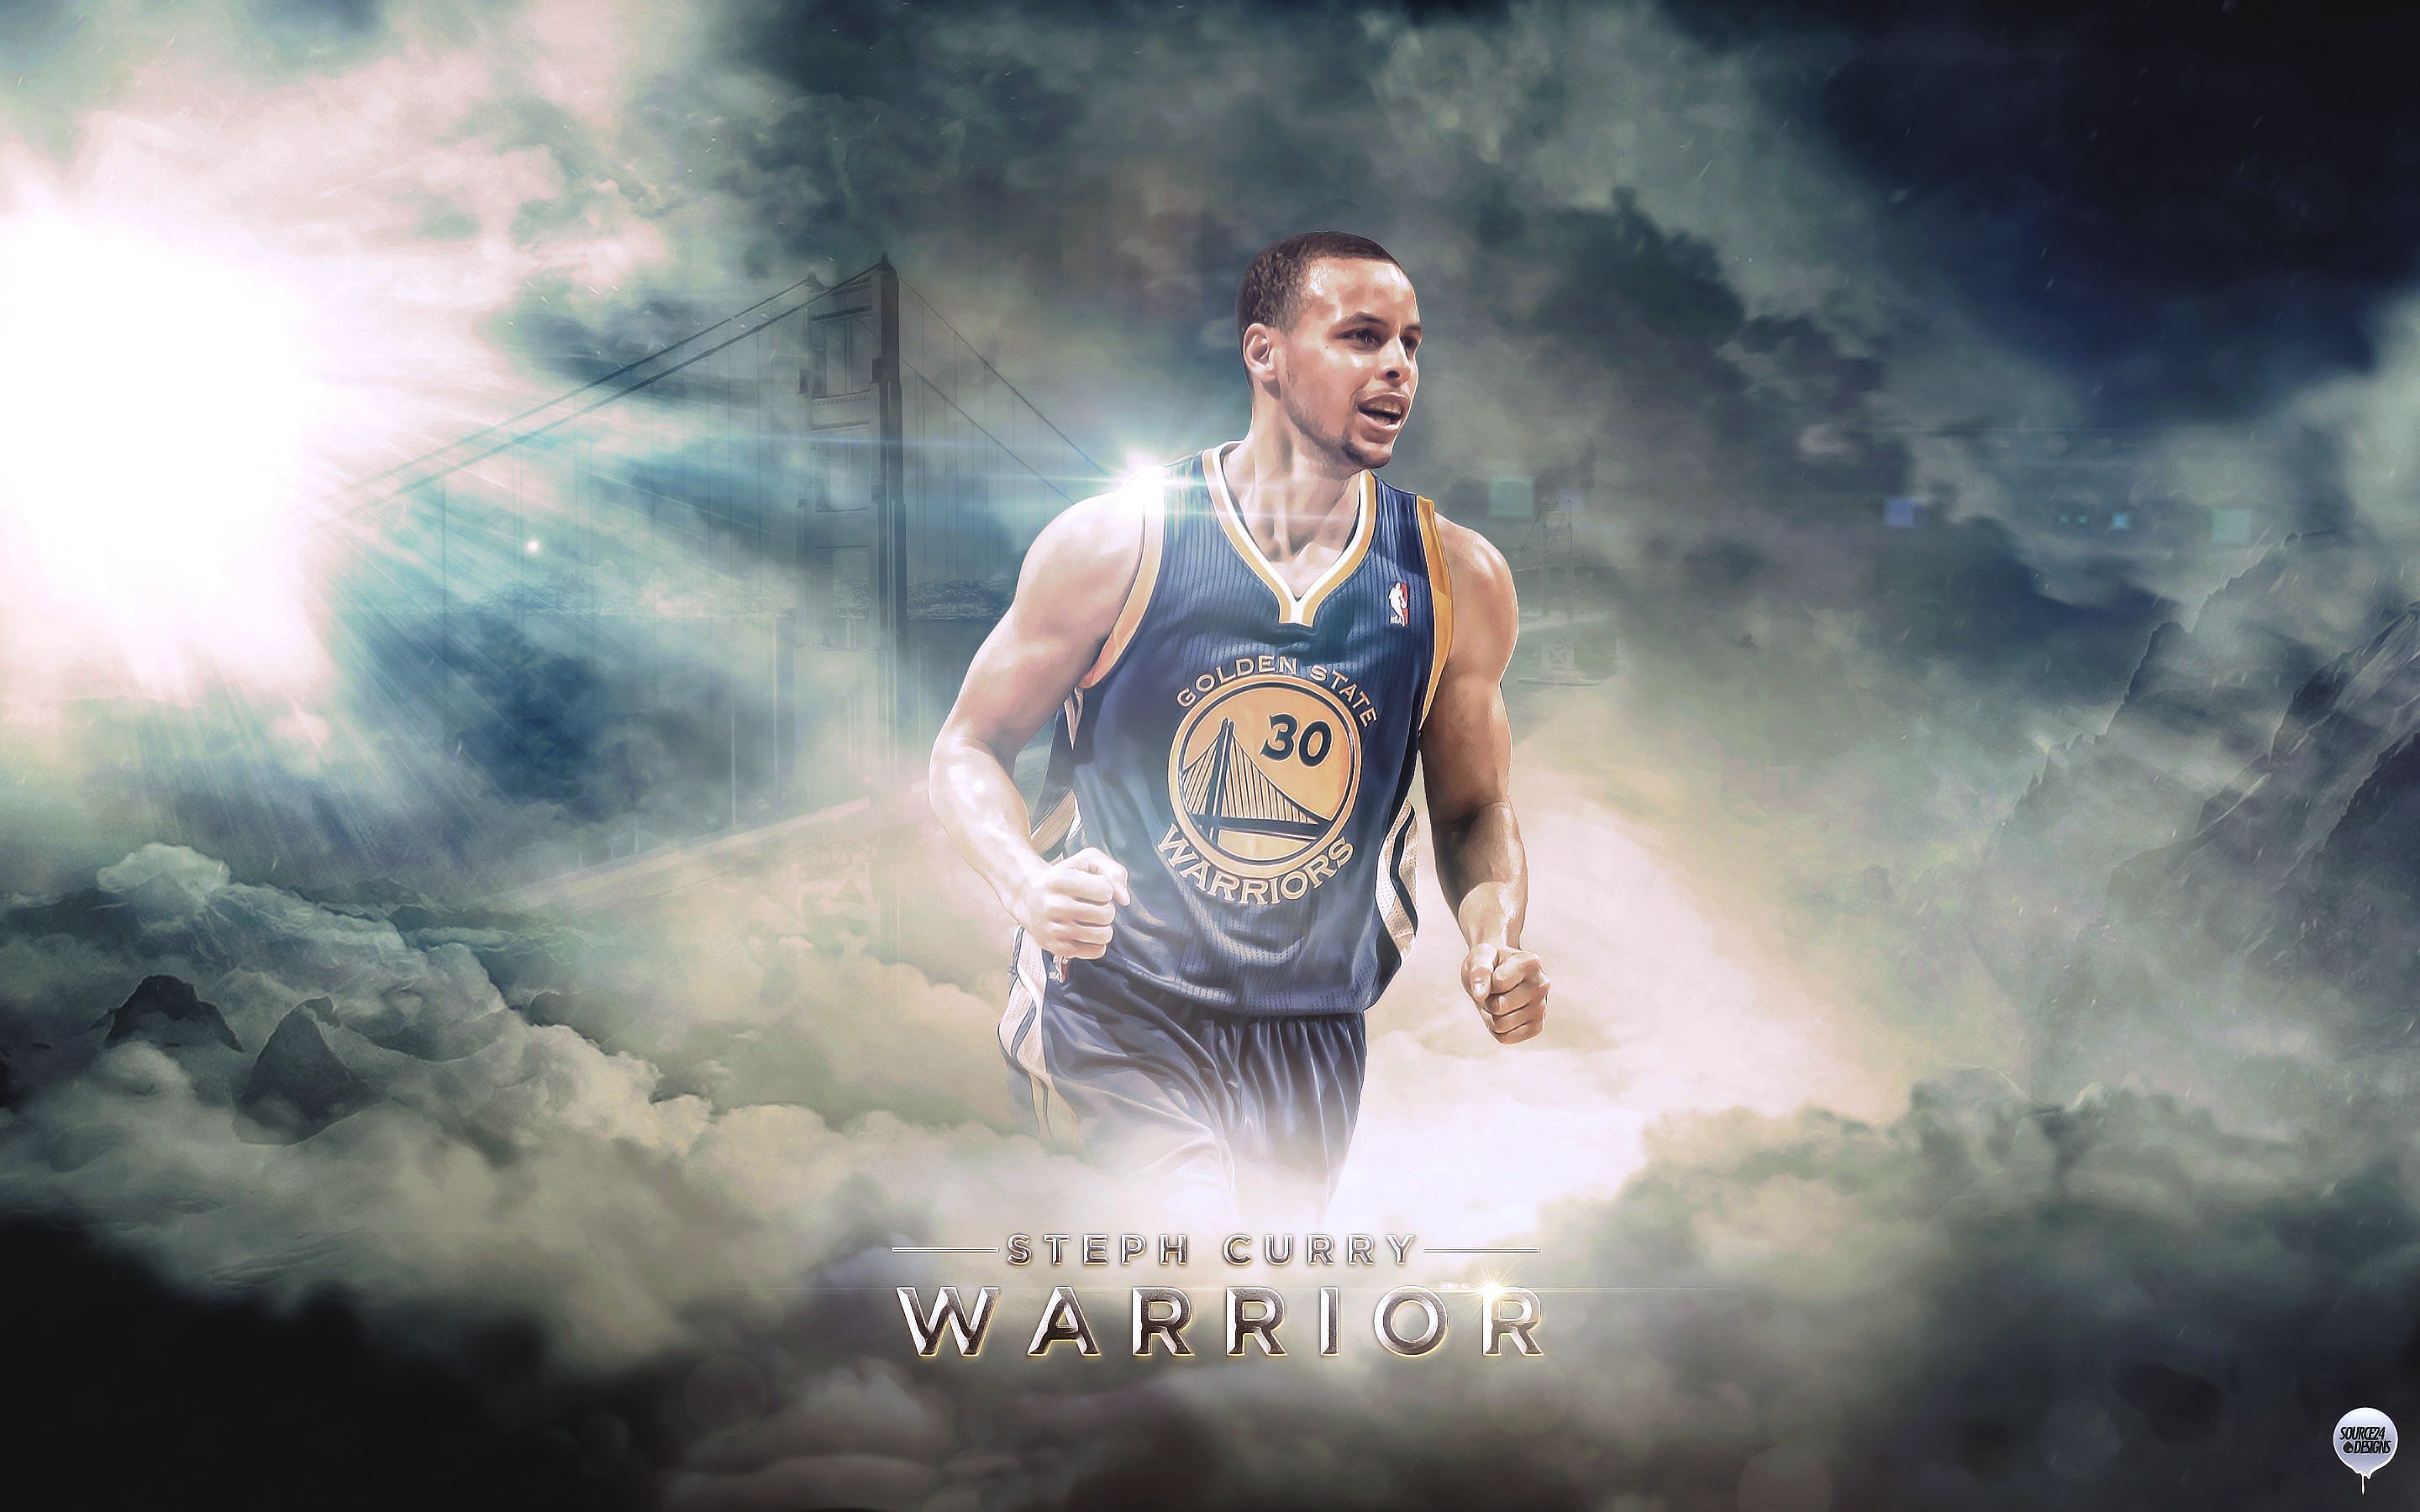 STEPHEN CURRY. Stephen curry basketball, Curry wallpaper, Curry basketball